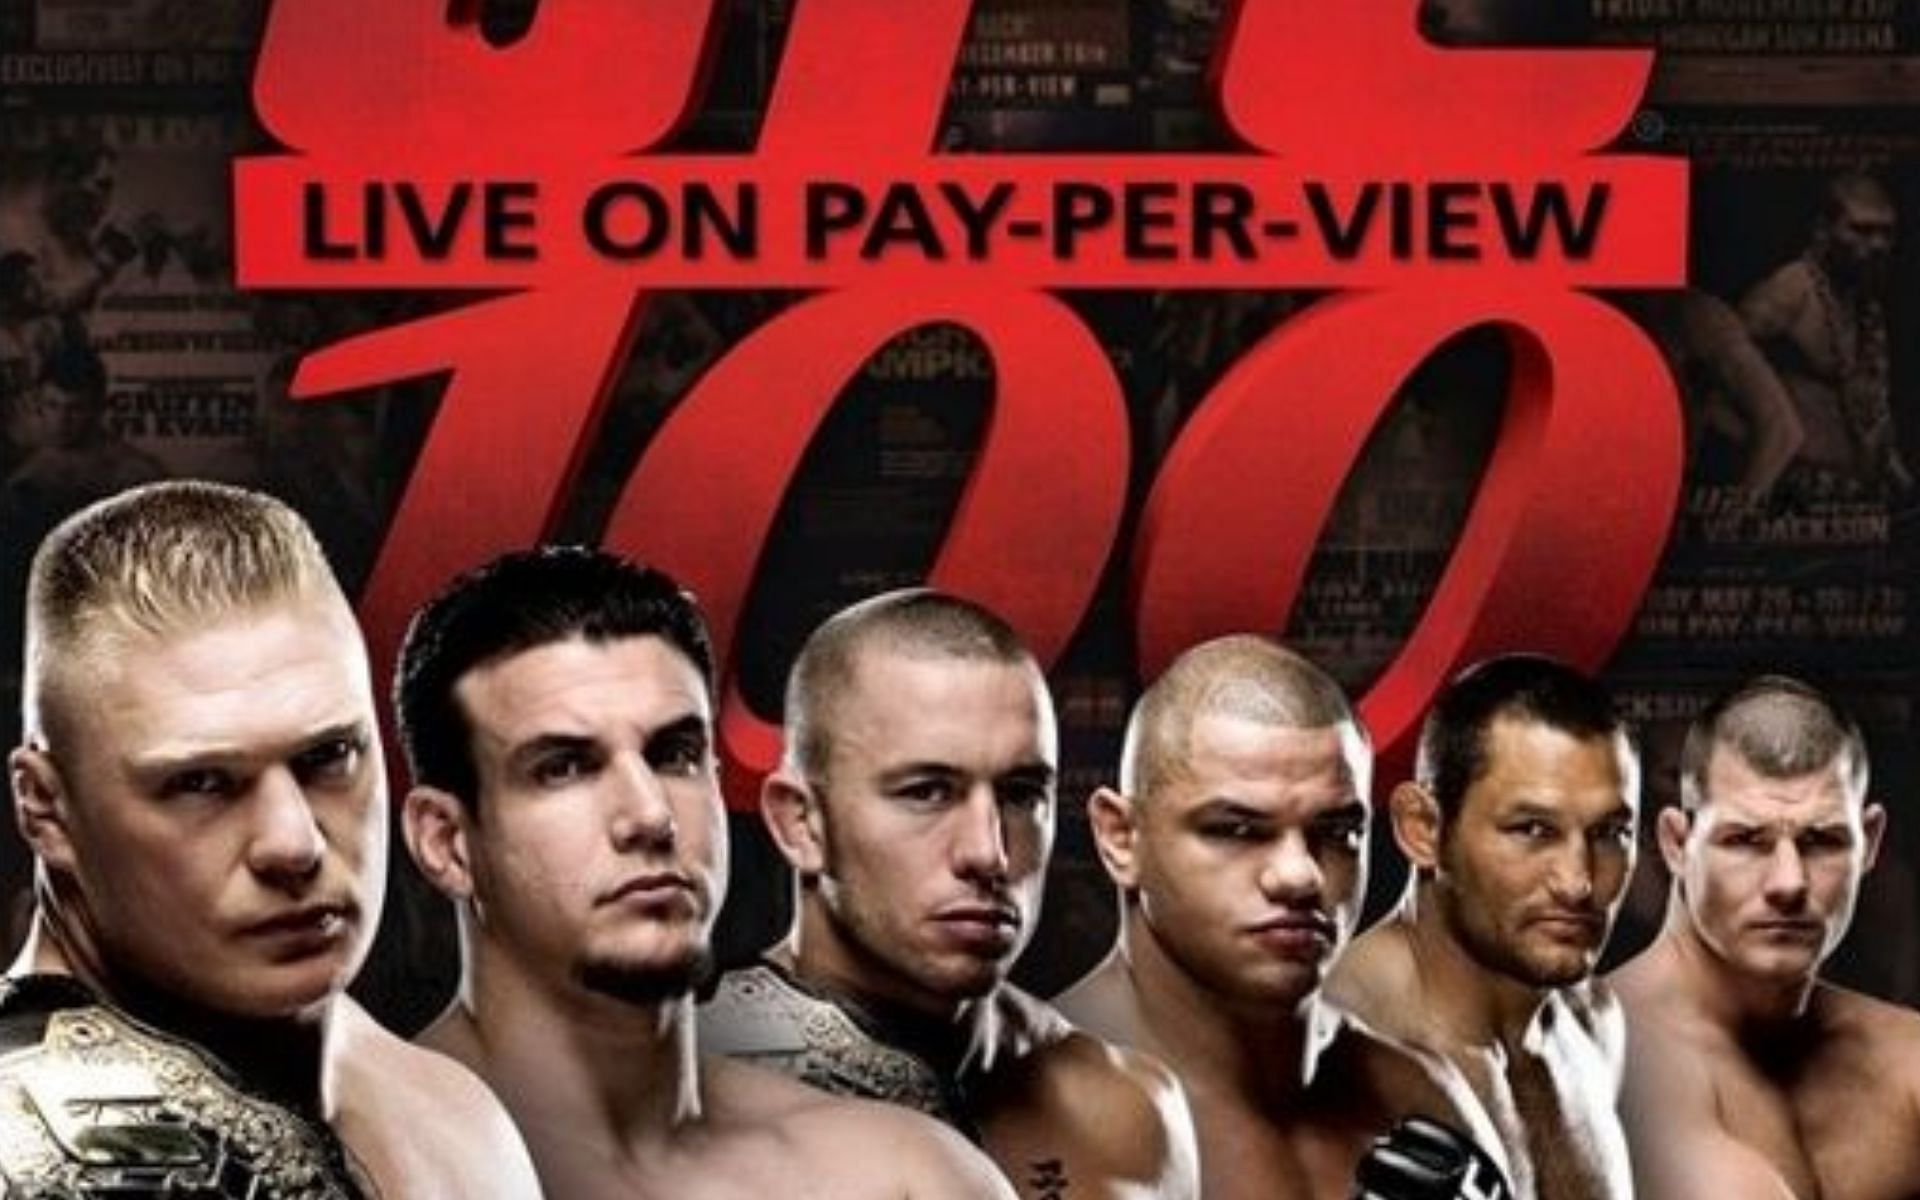 UFC 100 took place over a decade ago in 2009